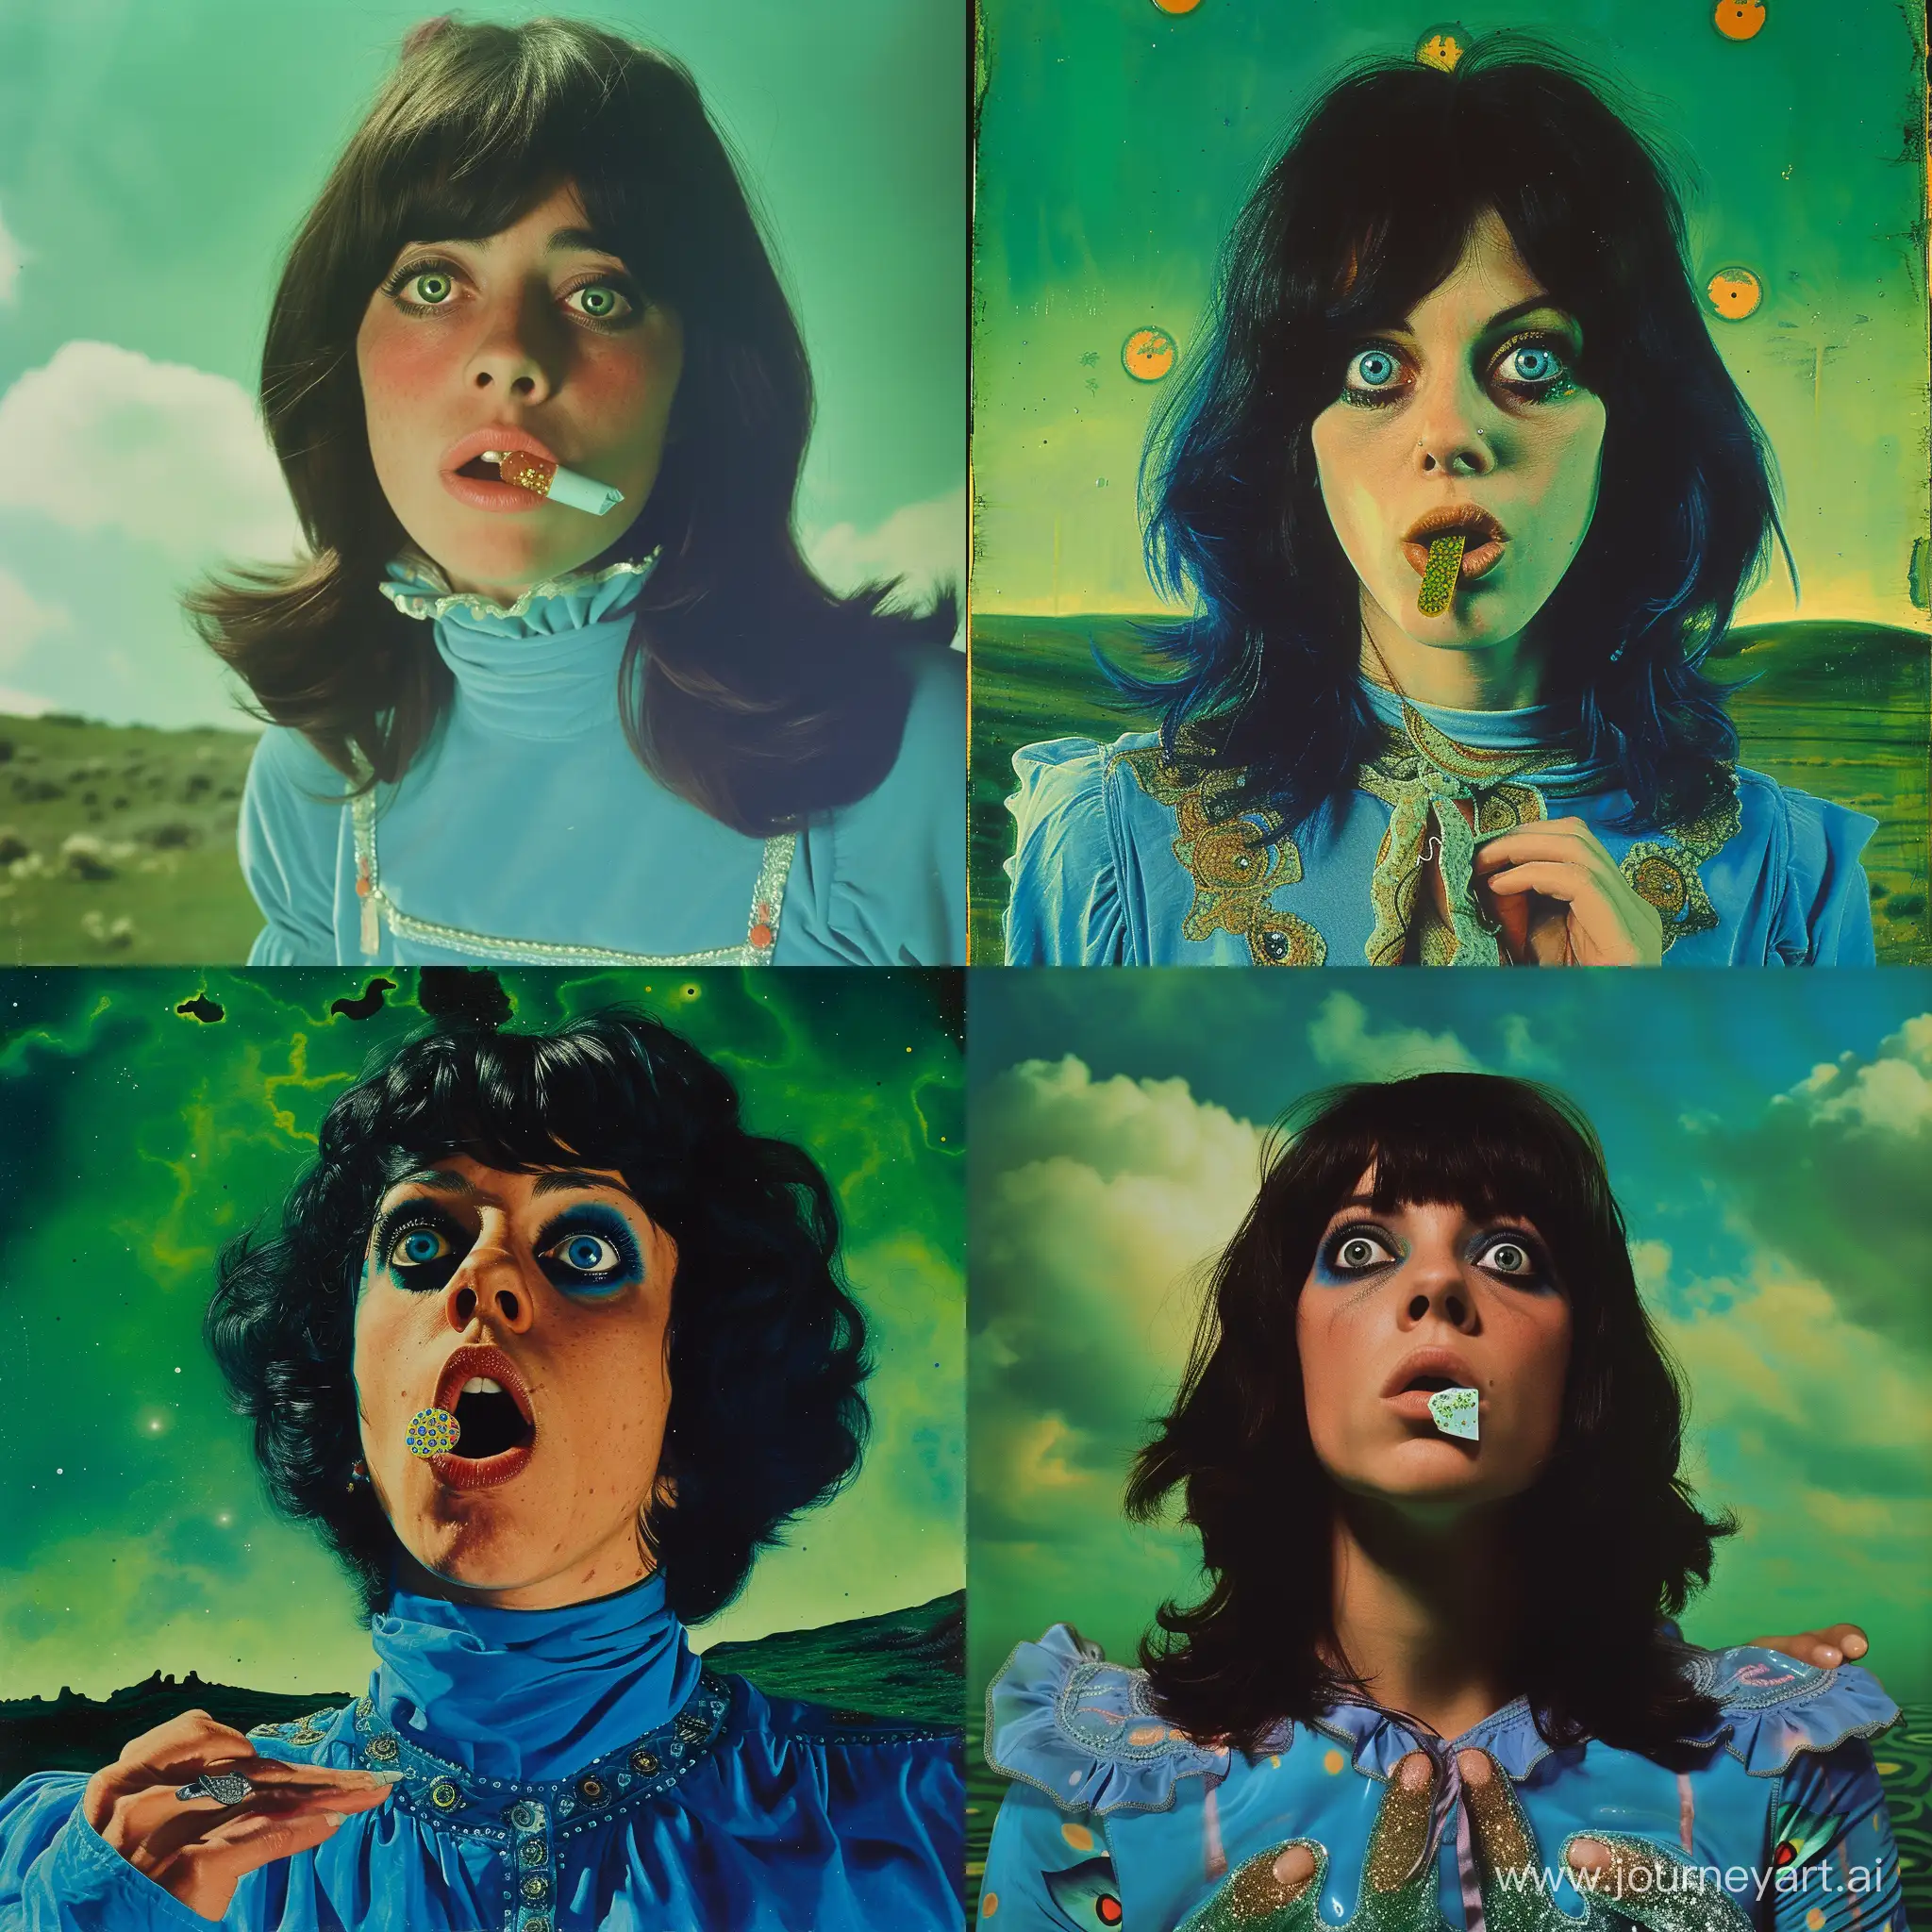 Grace Slick 27 years old, having a piece of lsd on her tounge, big pupils, green sky, blue clothes, psychedelic background